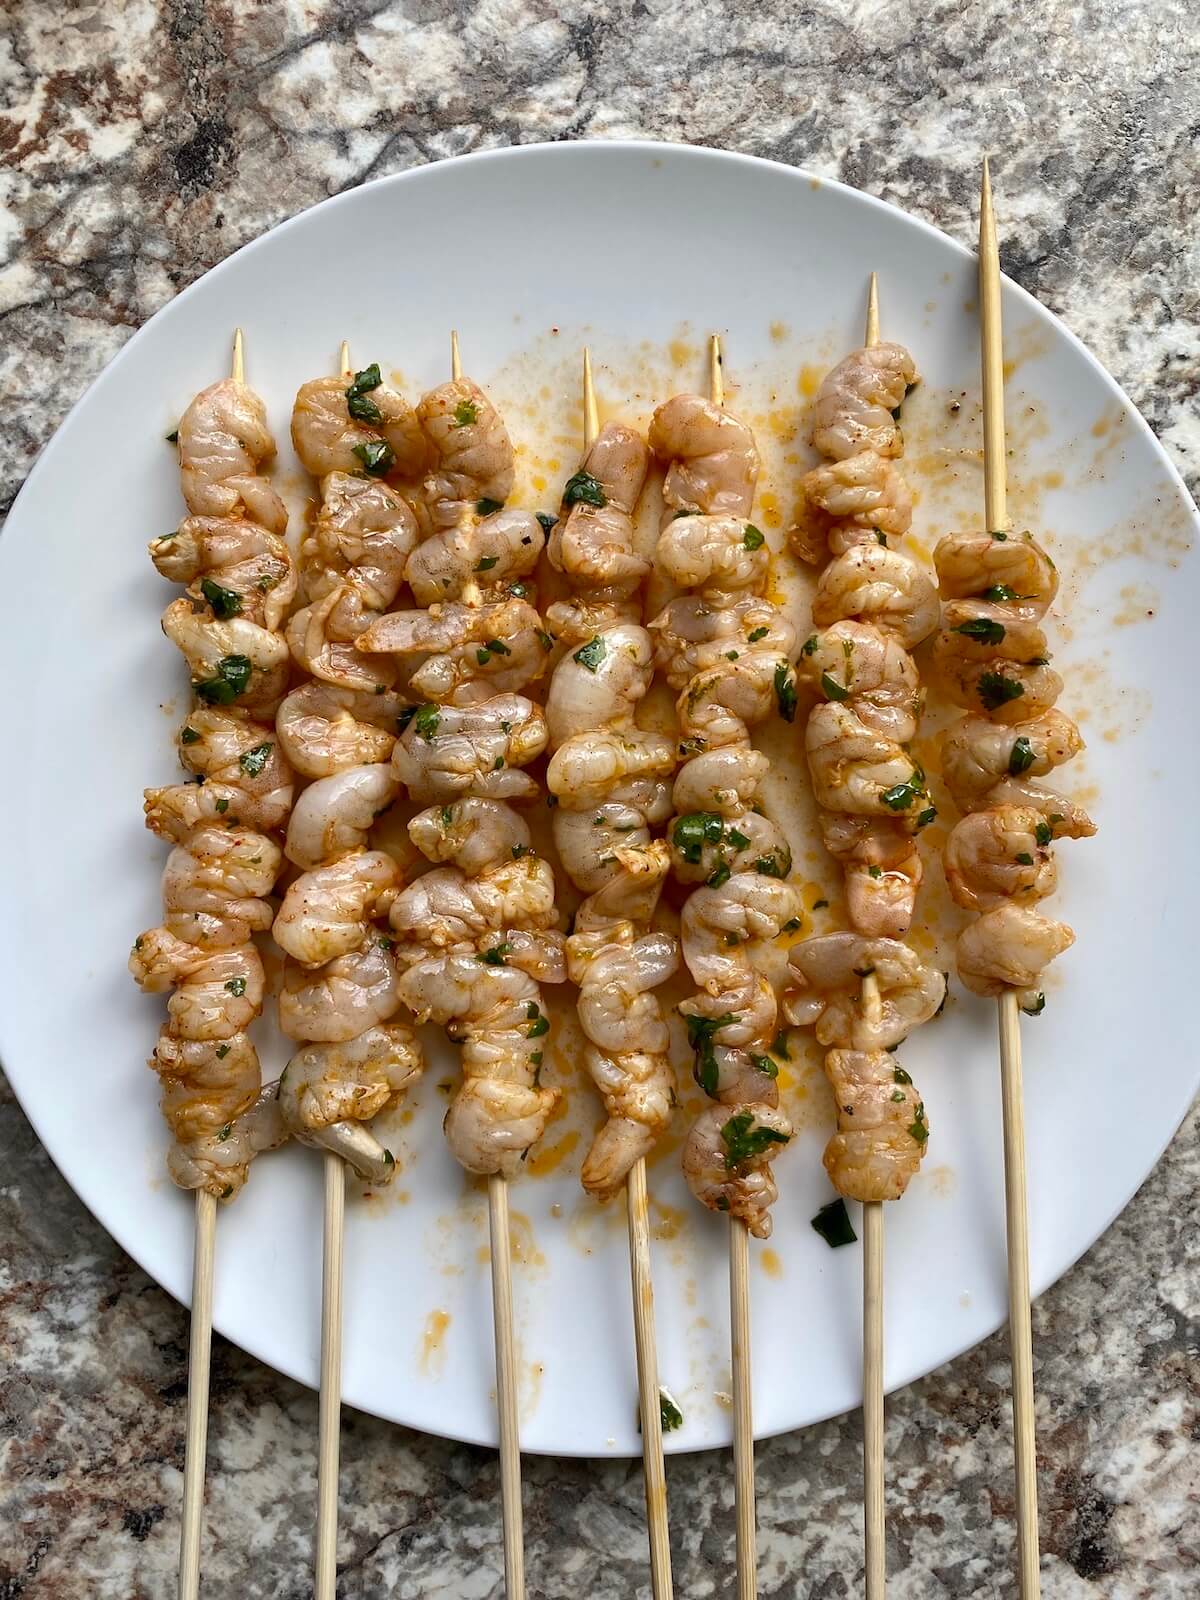 Raw, marinated shrimp on bamboo skewers on a white plate.